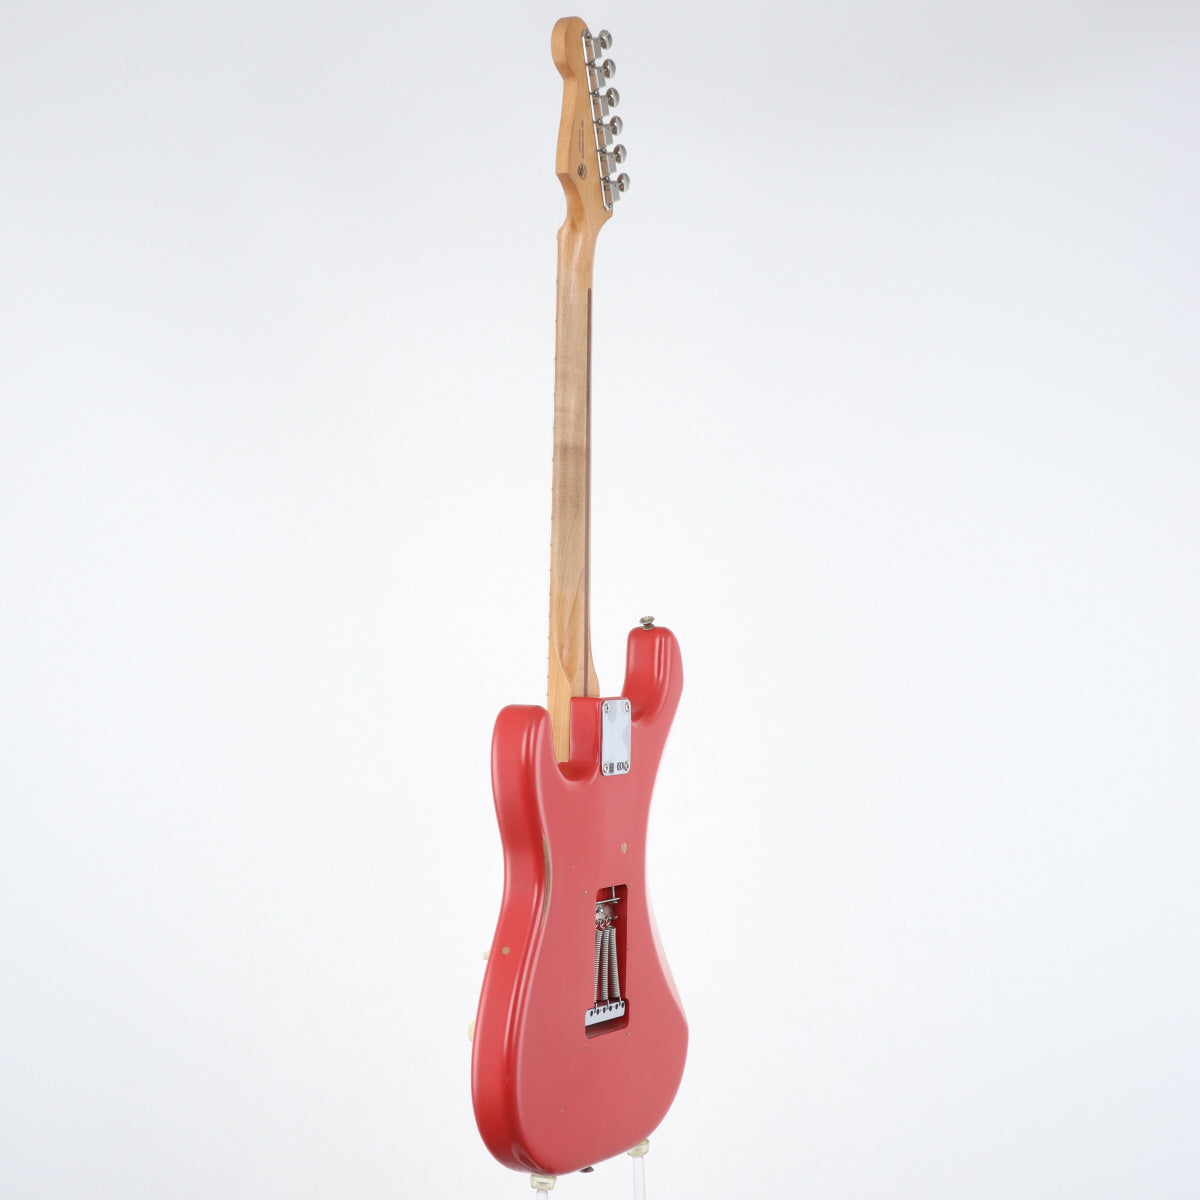 [SN MX21054235] USED Fender Mexico Fender Mexico / Road Worn 50s Stratocaster Fiesta Red [20]